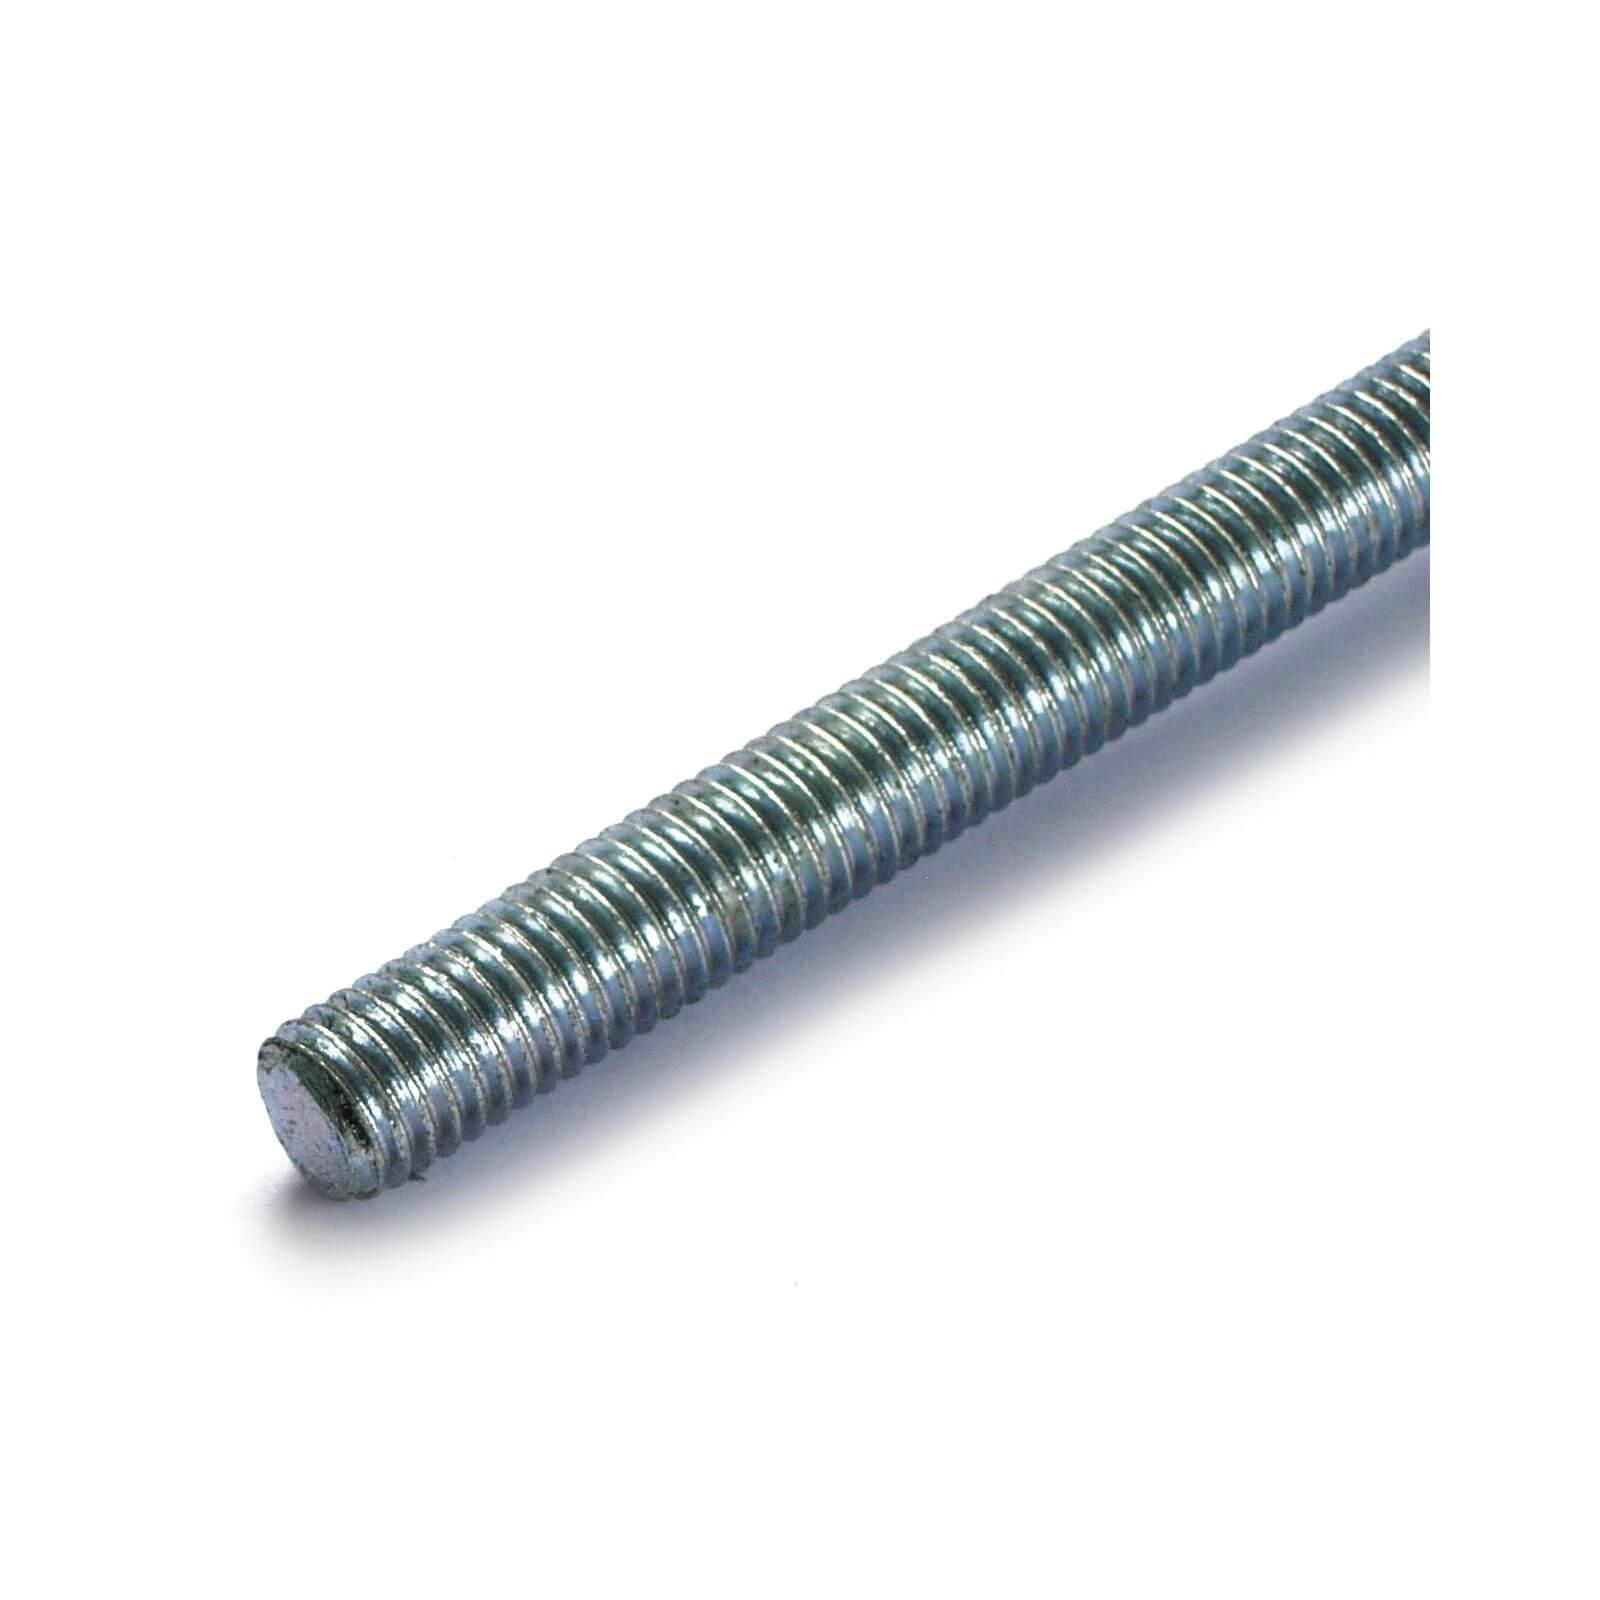 Threaded Rod (500mm) - Bright Zinc Plated - M6 - 2 Pack